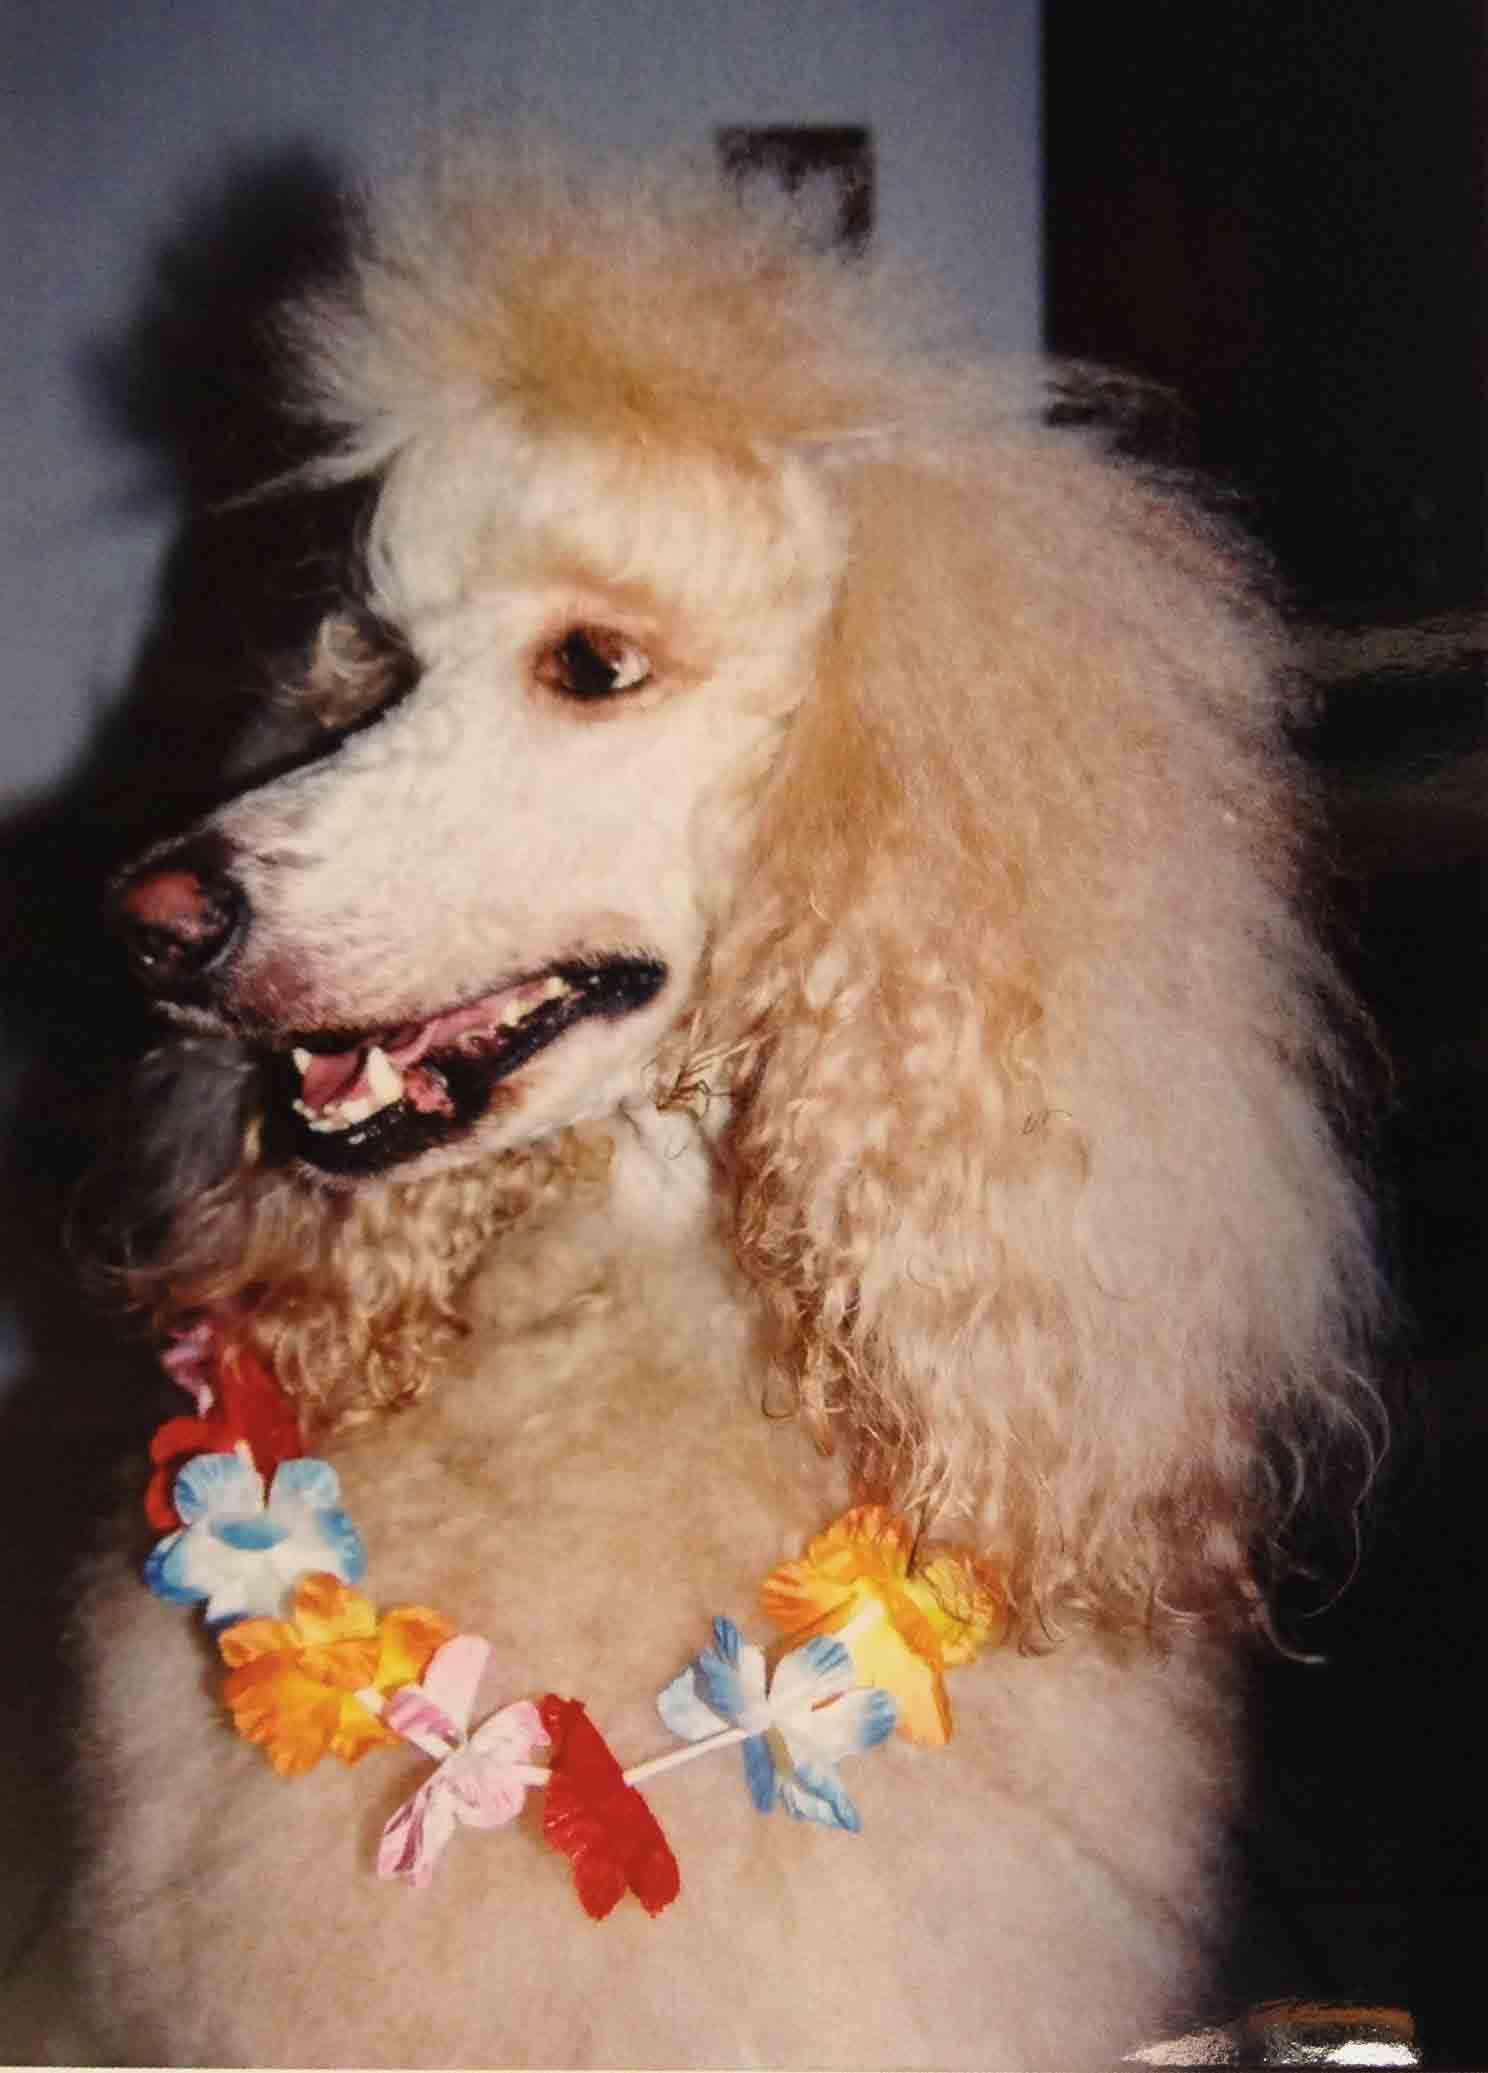 Lora with a garland